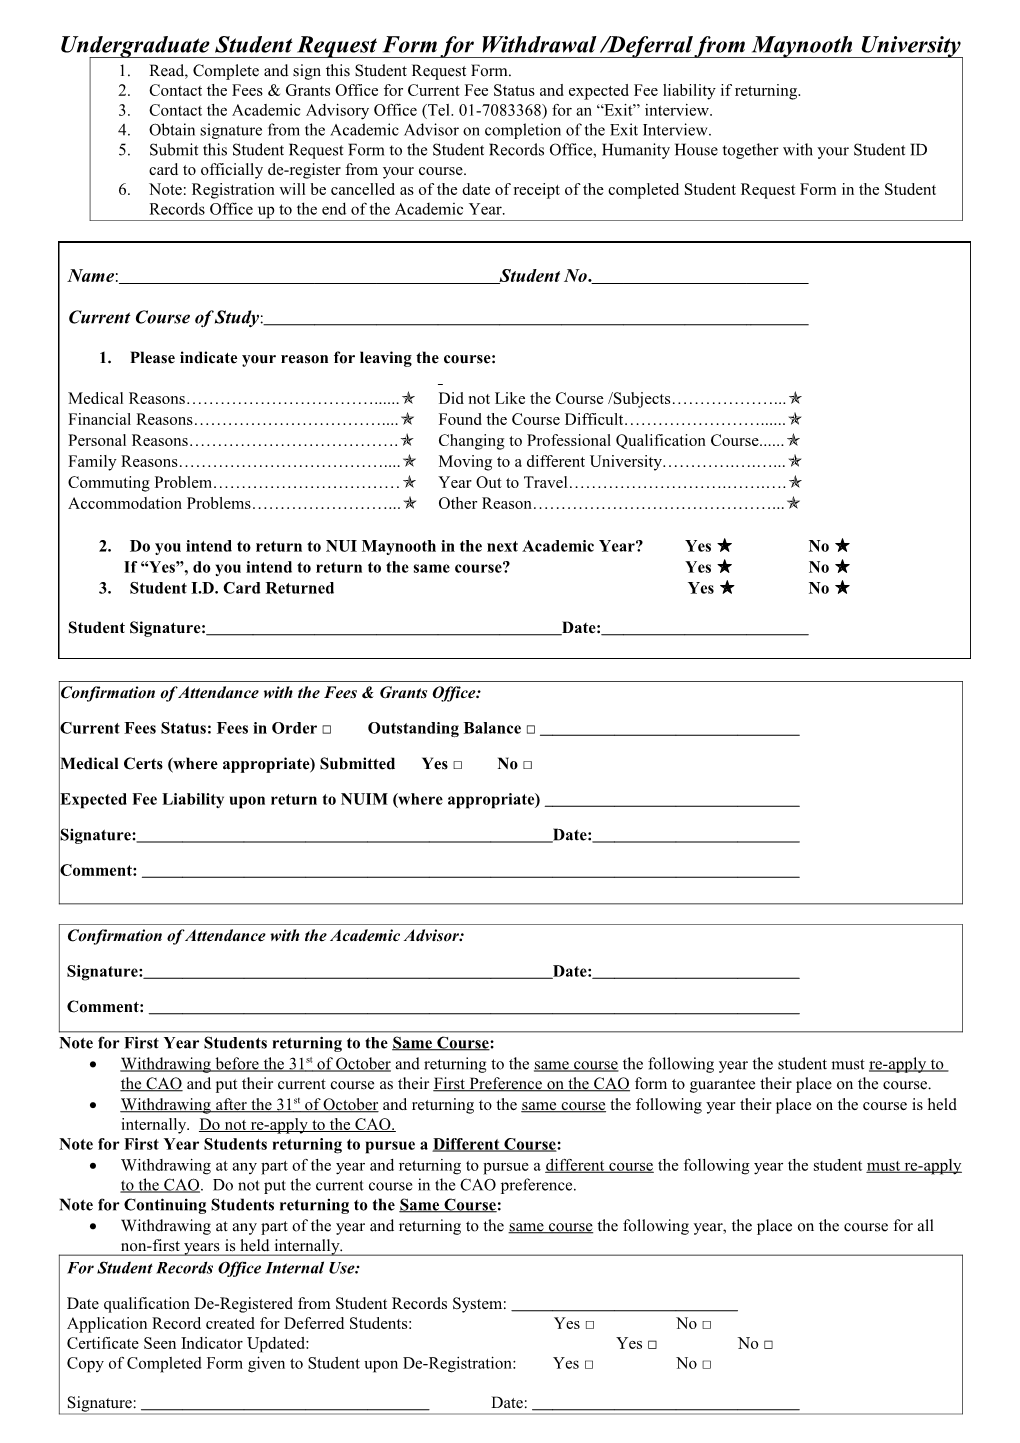 Undergraduate Student Request Form for Withdrawal /Deferral from Maynooth University